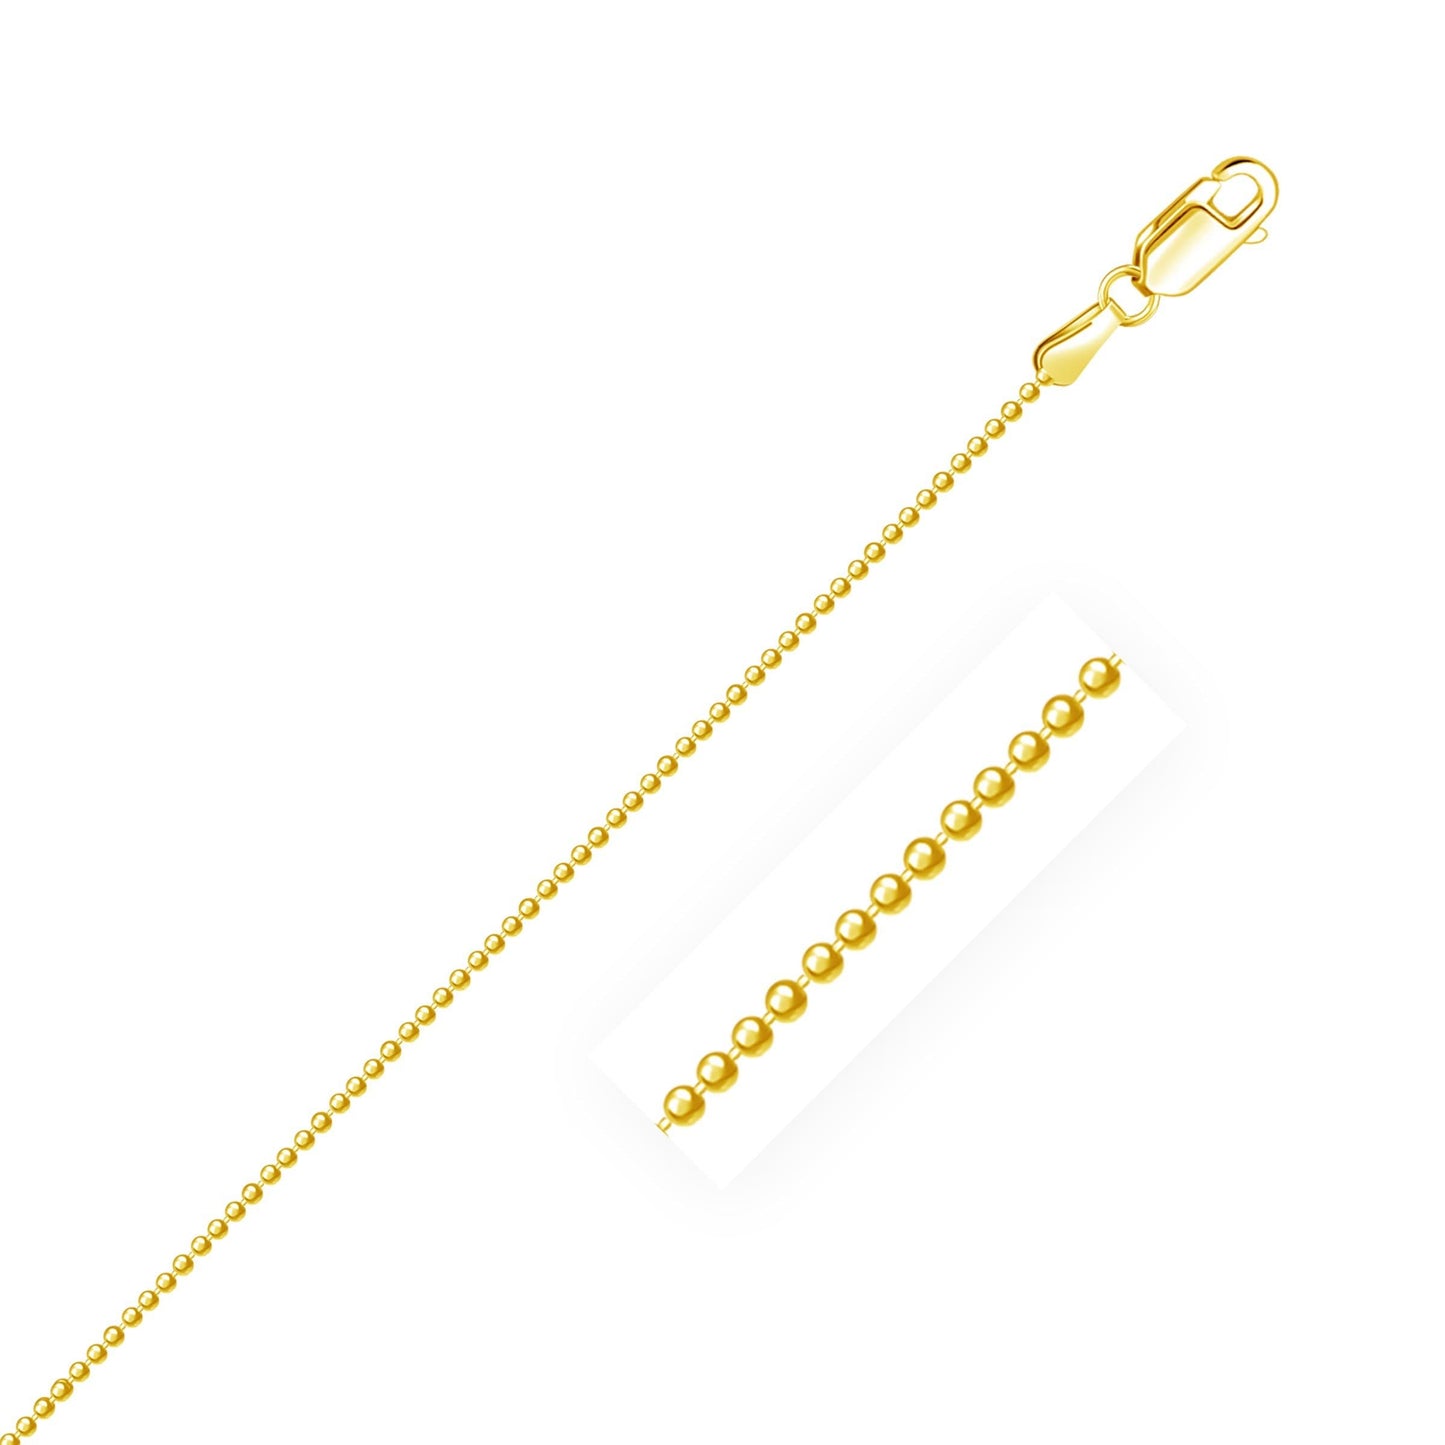 14k Yellow Gold Bead Chain in 1.2 mm